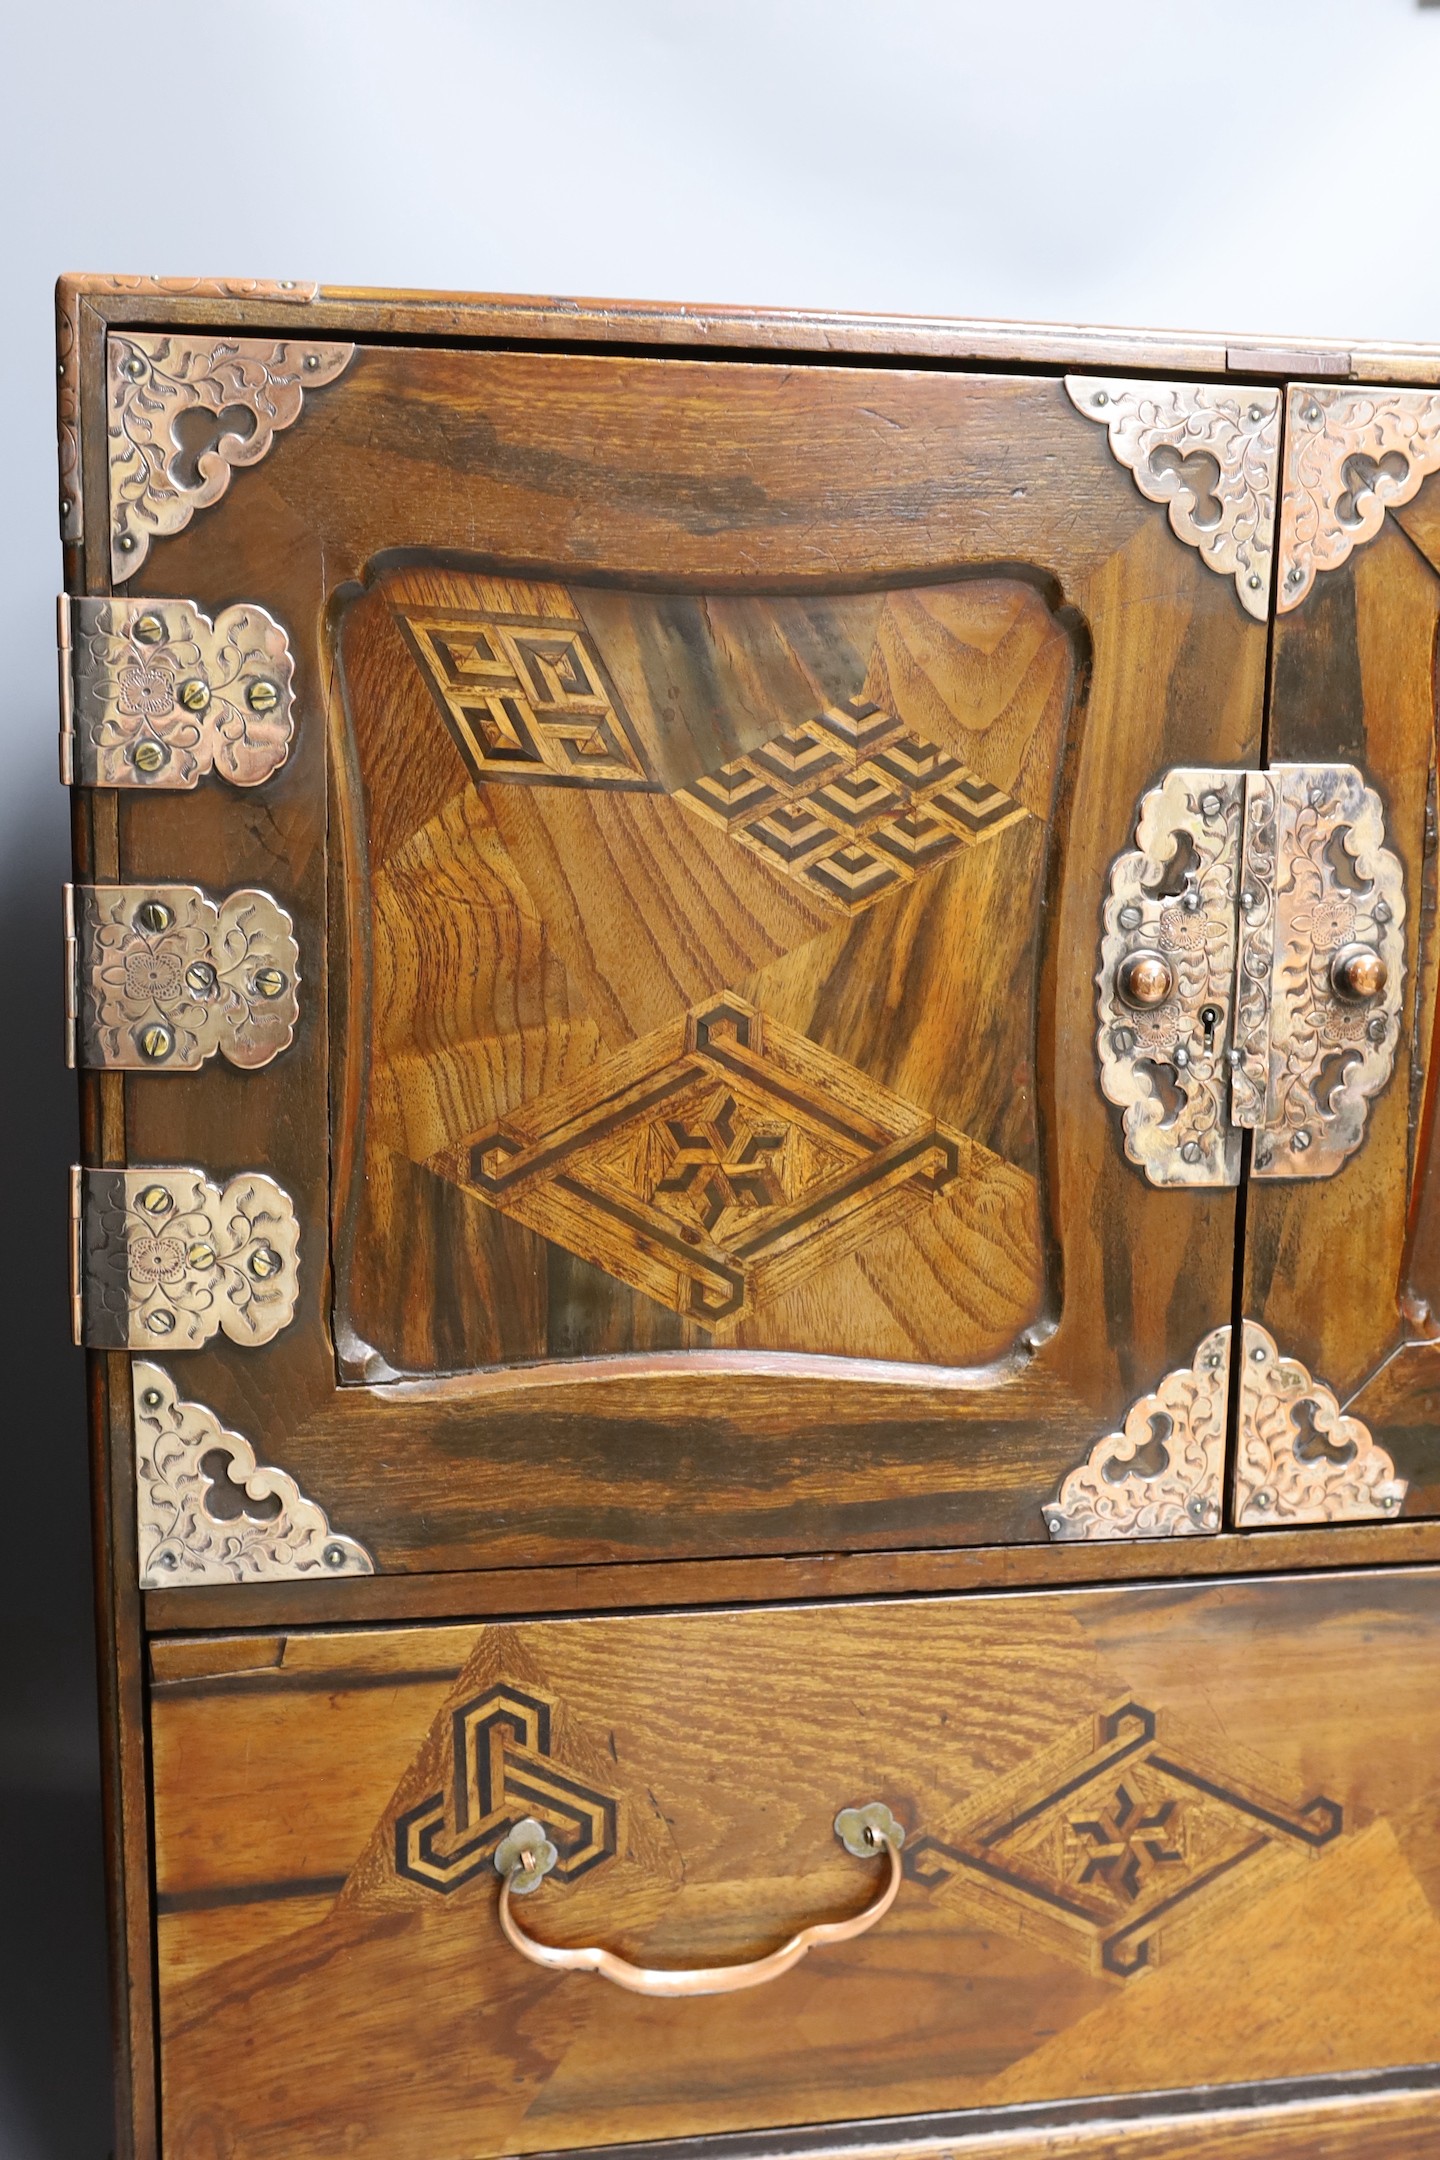 A 19th century Japanese Hakone parquetry table top chest, 55 cms wide x 46.5 cms high.